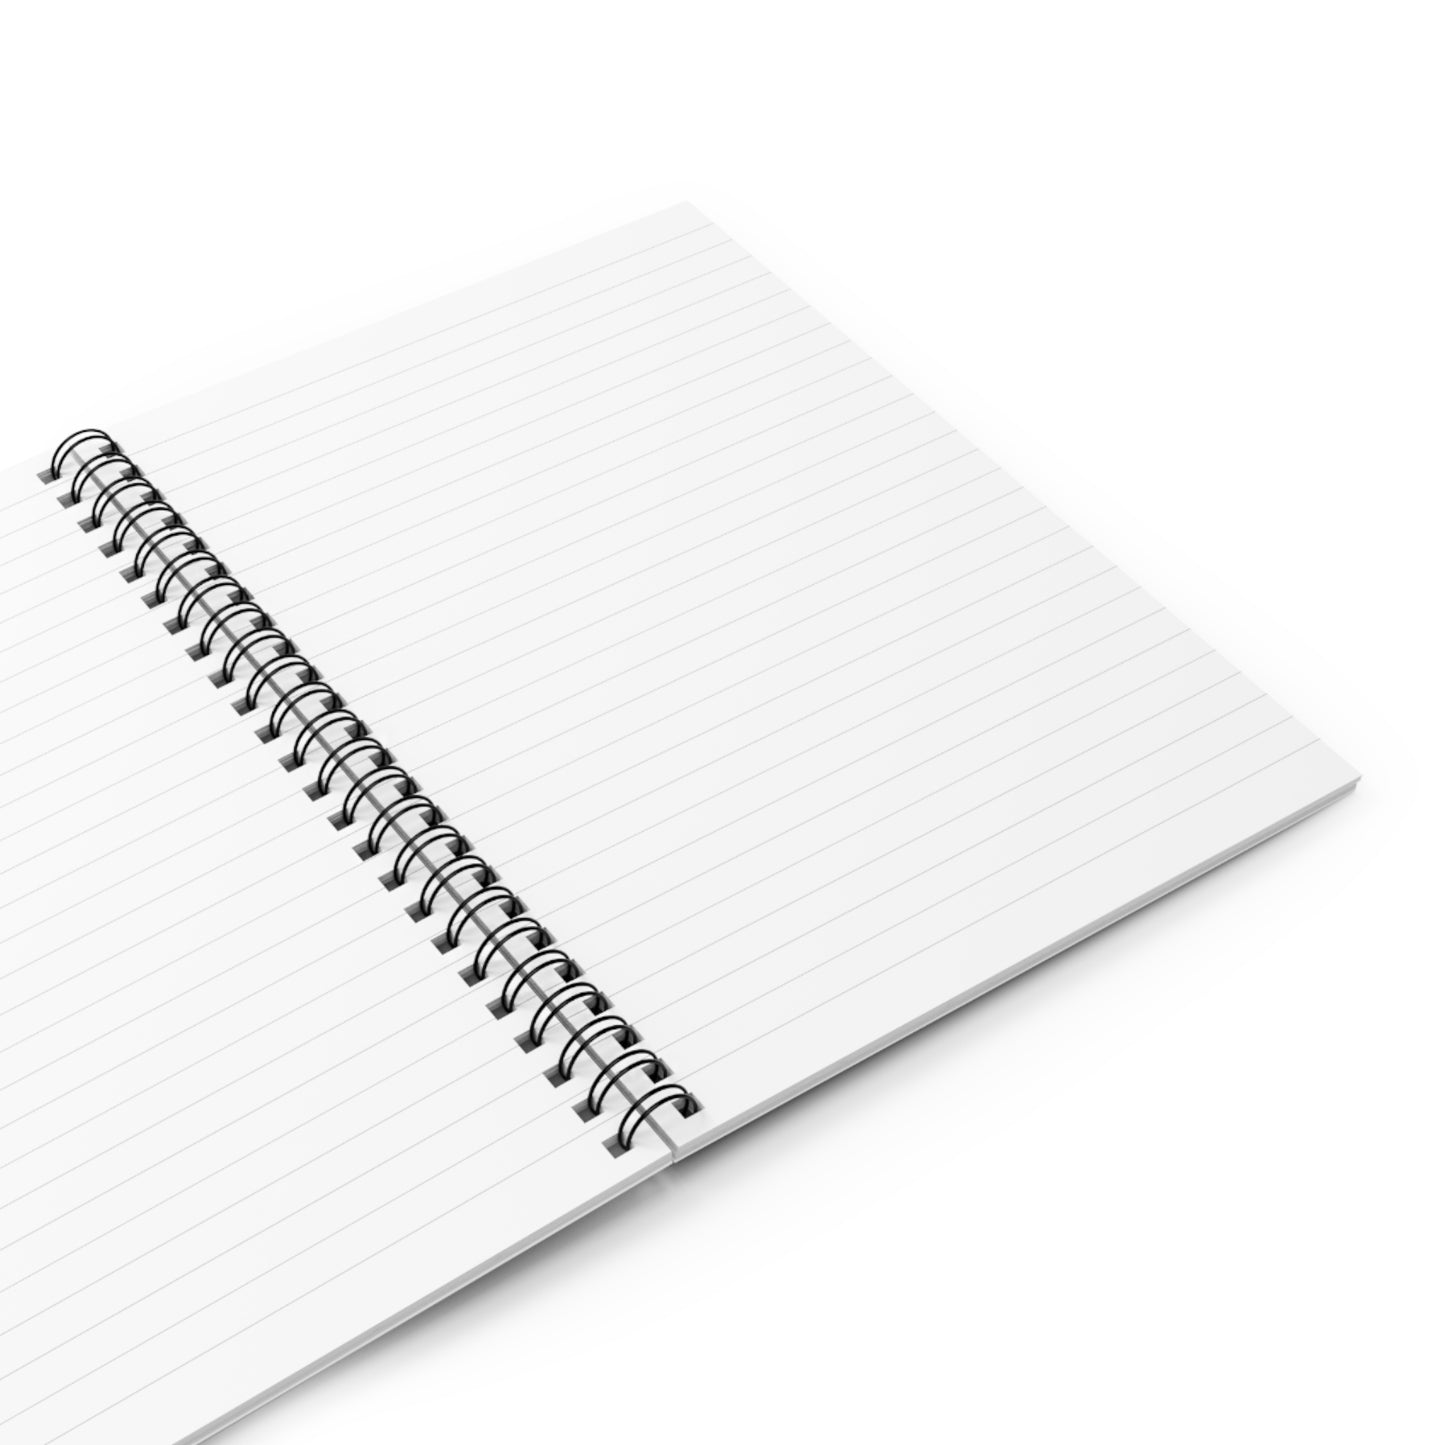 Life - Ruled Line Notebook